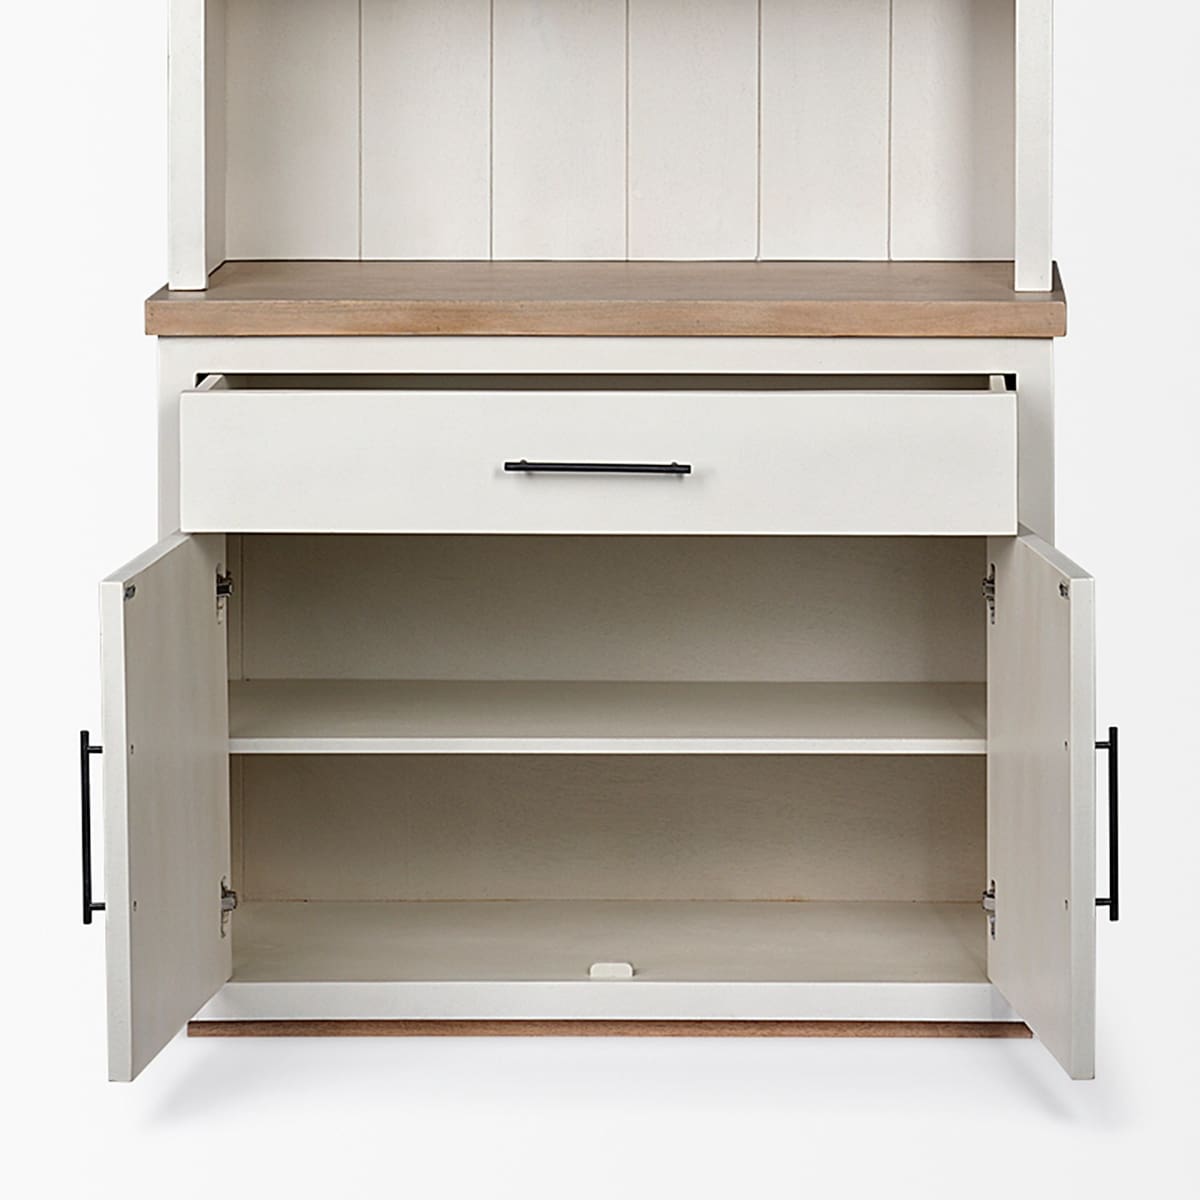 Fairview Shelving Unit White Wood | Brown Wood - shelving